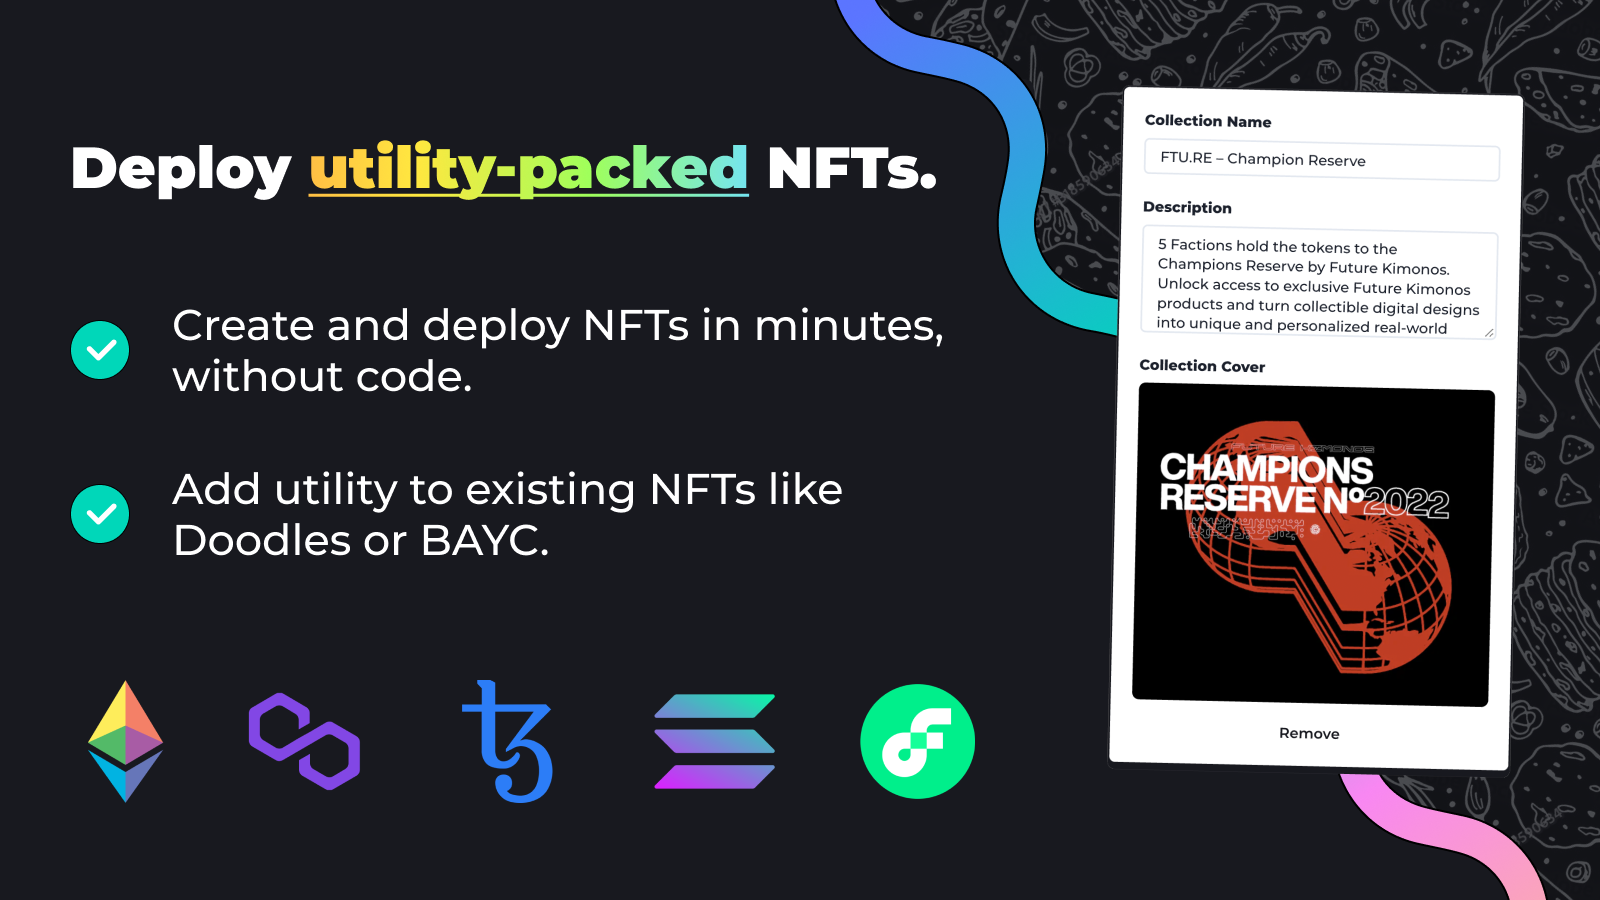 Deploy utility-packed NFTs